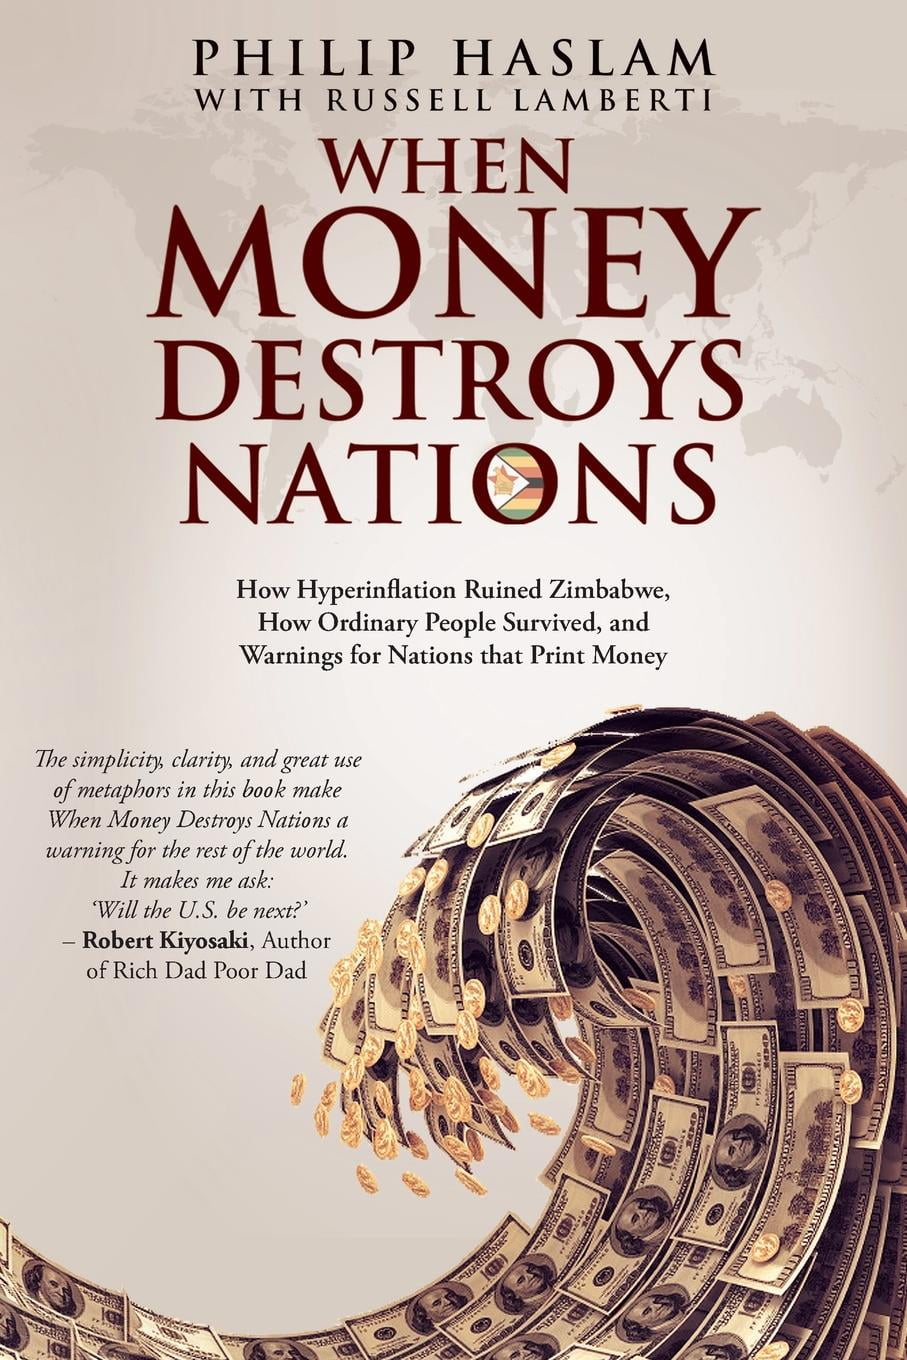 When Money Destroys Nations How Hyperinflation Ruined Zimbabwe How
Ordinary People Survived and Warnings for Nations that Print Money
Epub-Ebook